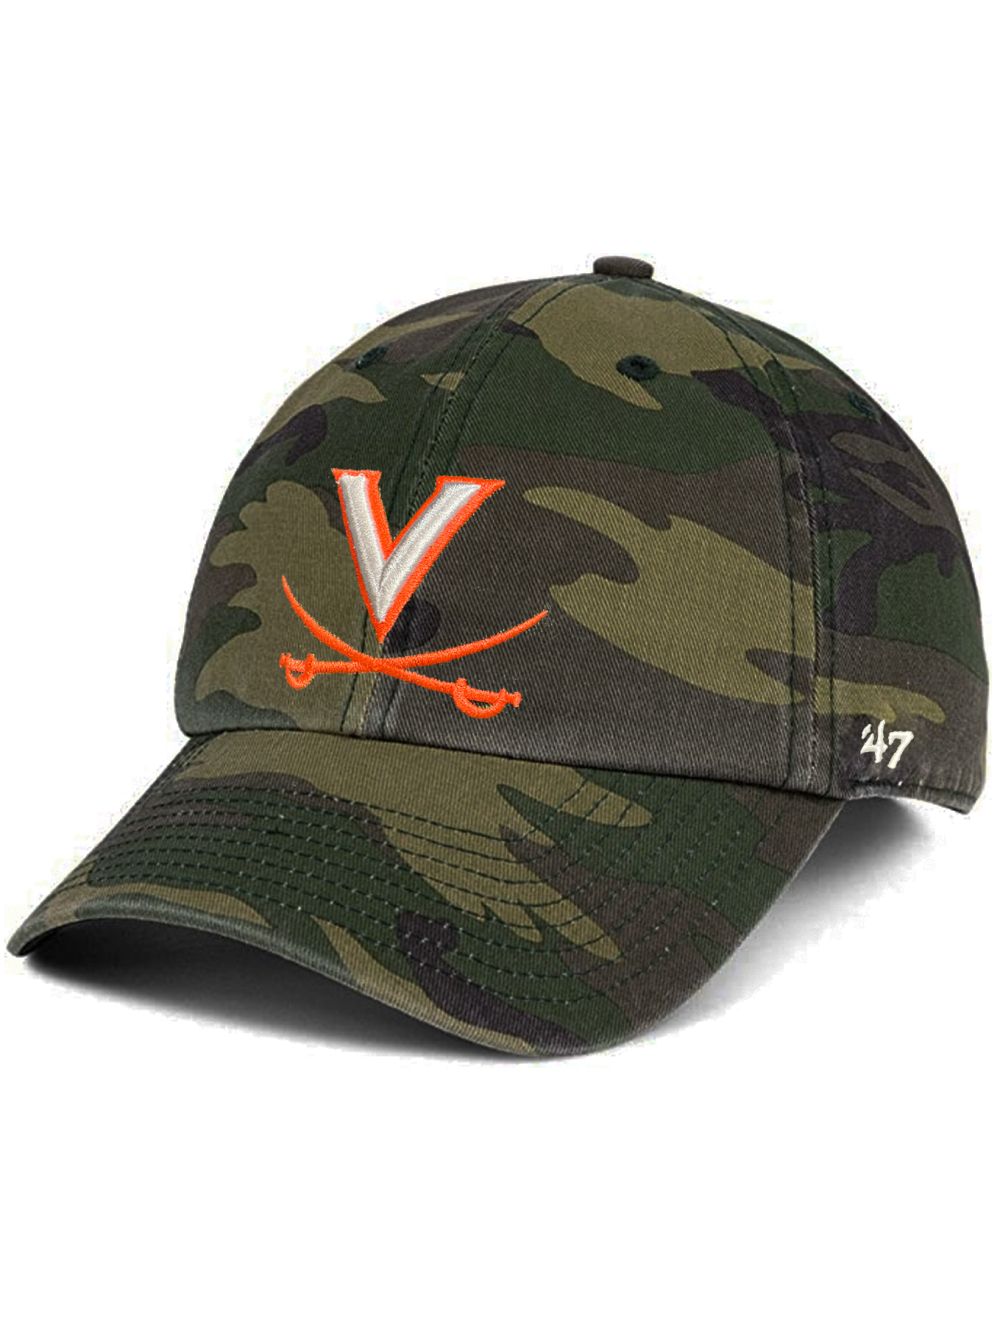 47 Brand Camouflage Hat - Mincer's of Charlottesville